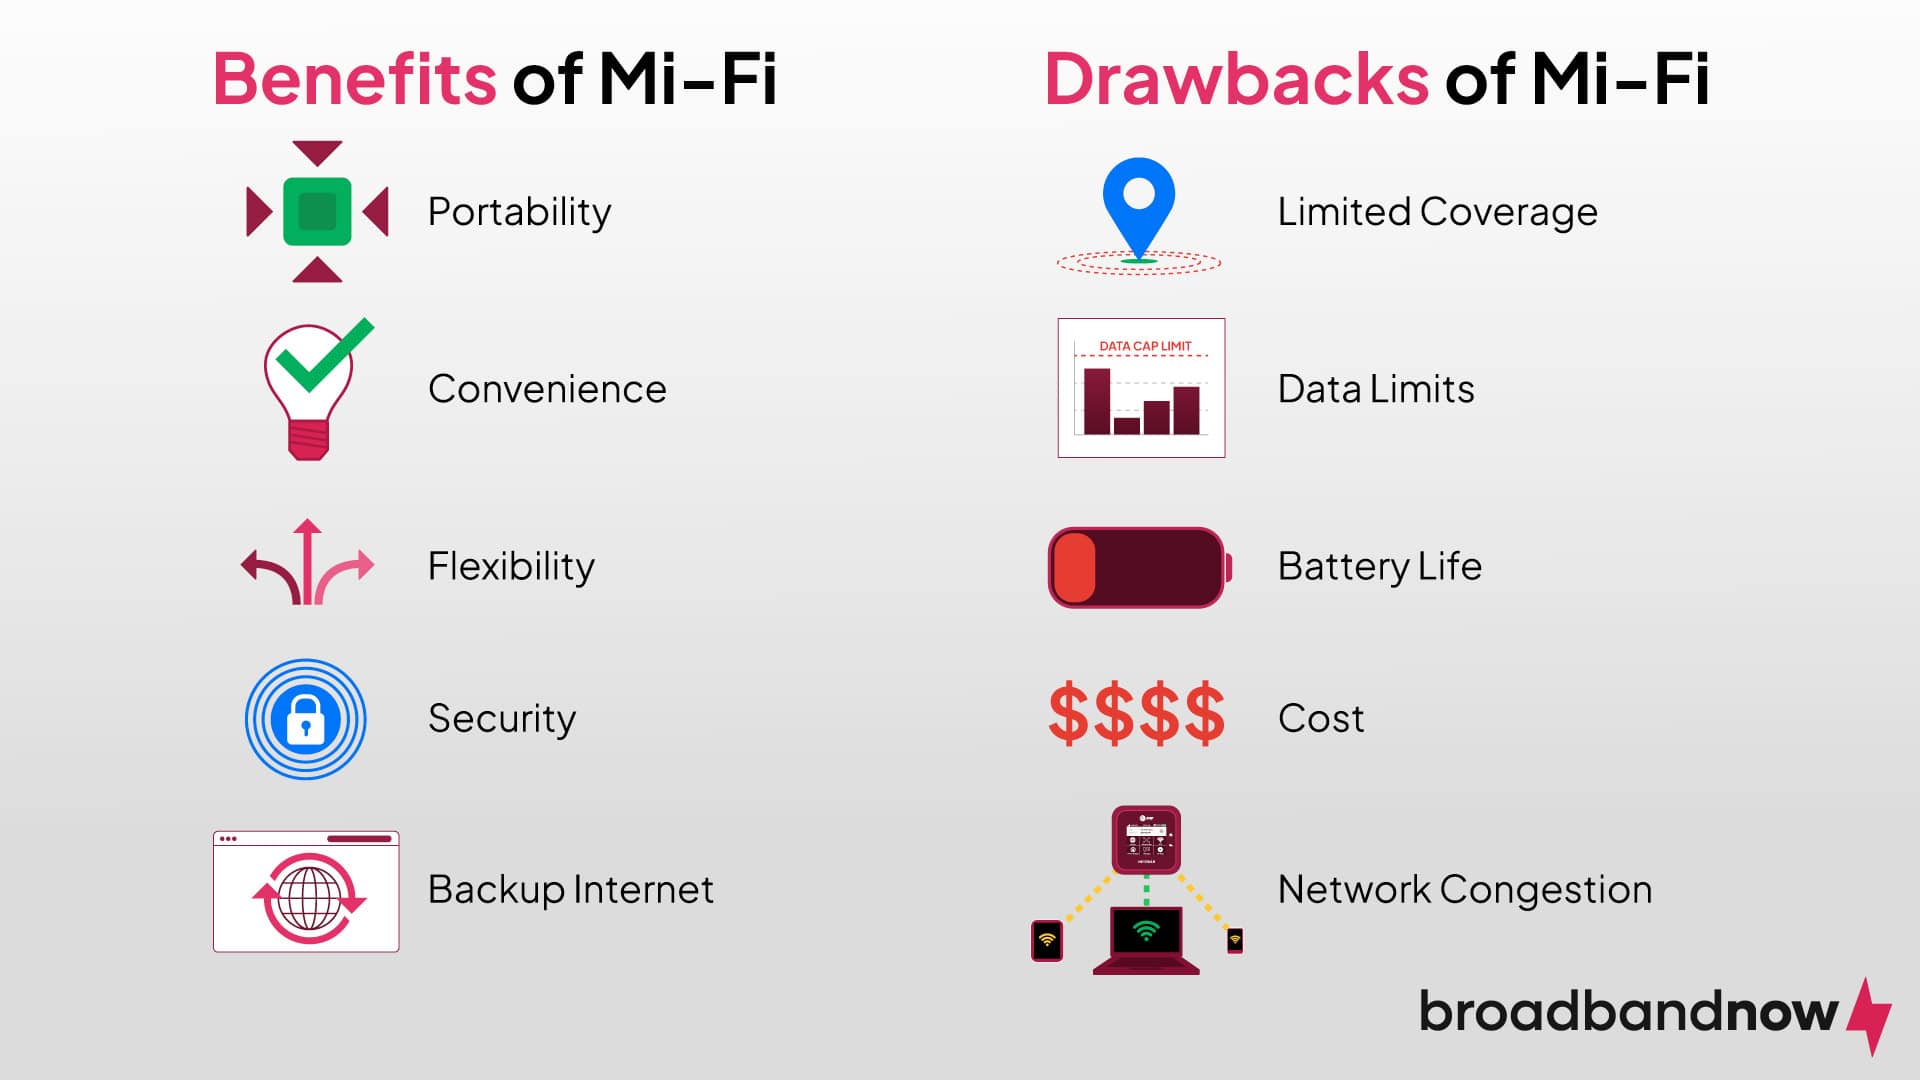 A graphic showing the benefits and drawbacks of Mi-Fi.